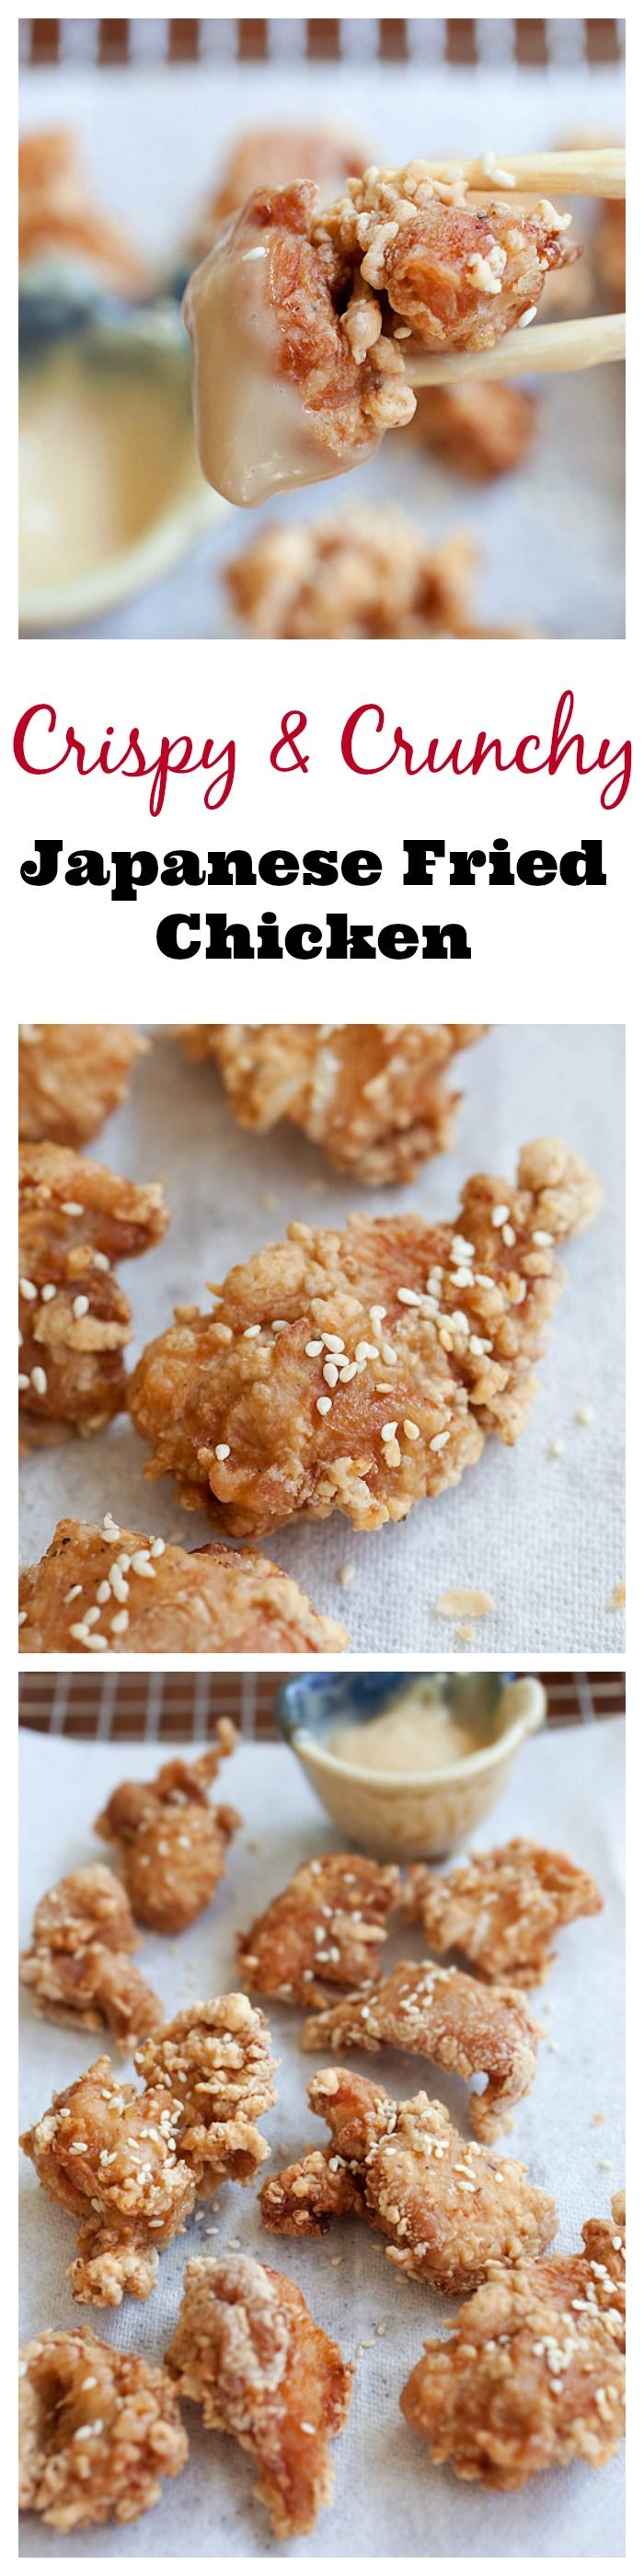 Crispy and Crunchy Japanese fried chicken recipe with mayo miso dipping sauce just like your favorite Japanese restaurants | rasamalaysia.com